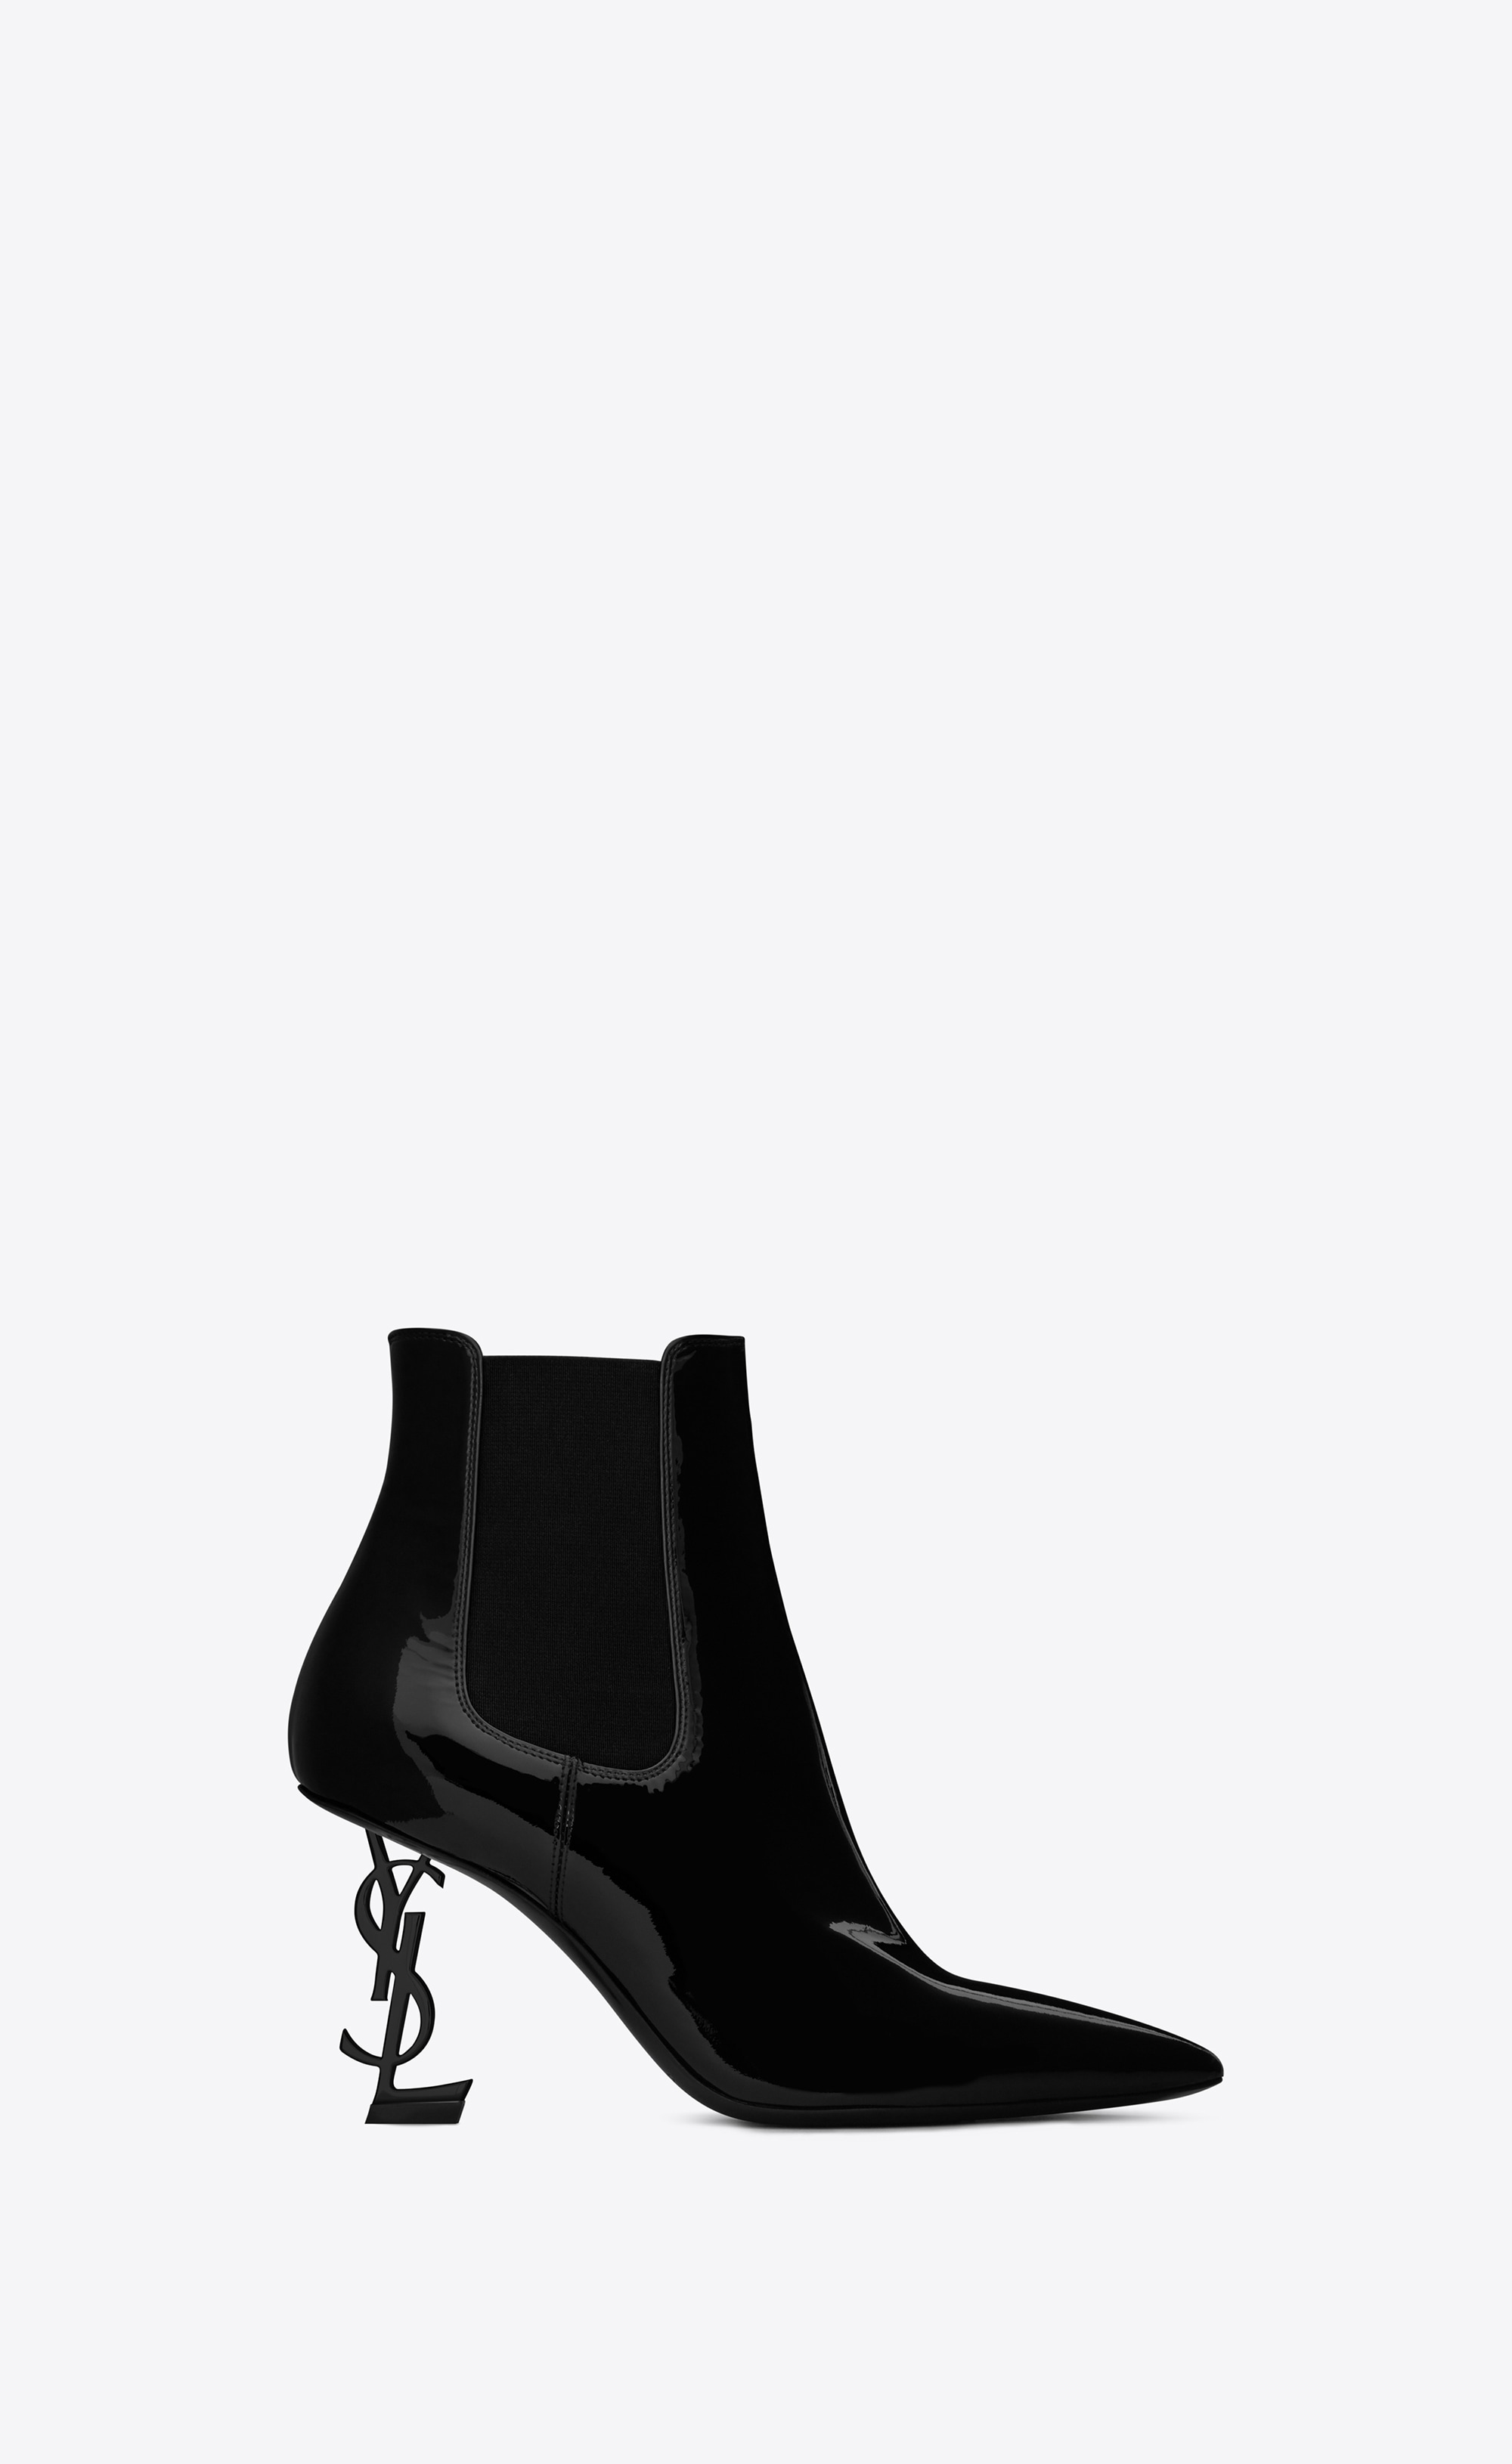 Saint Laurent OPYUM 85 Ankle Boot Black Patent Leather And Chrome | YSL.com